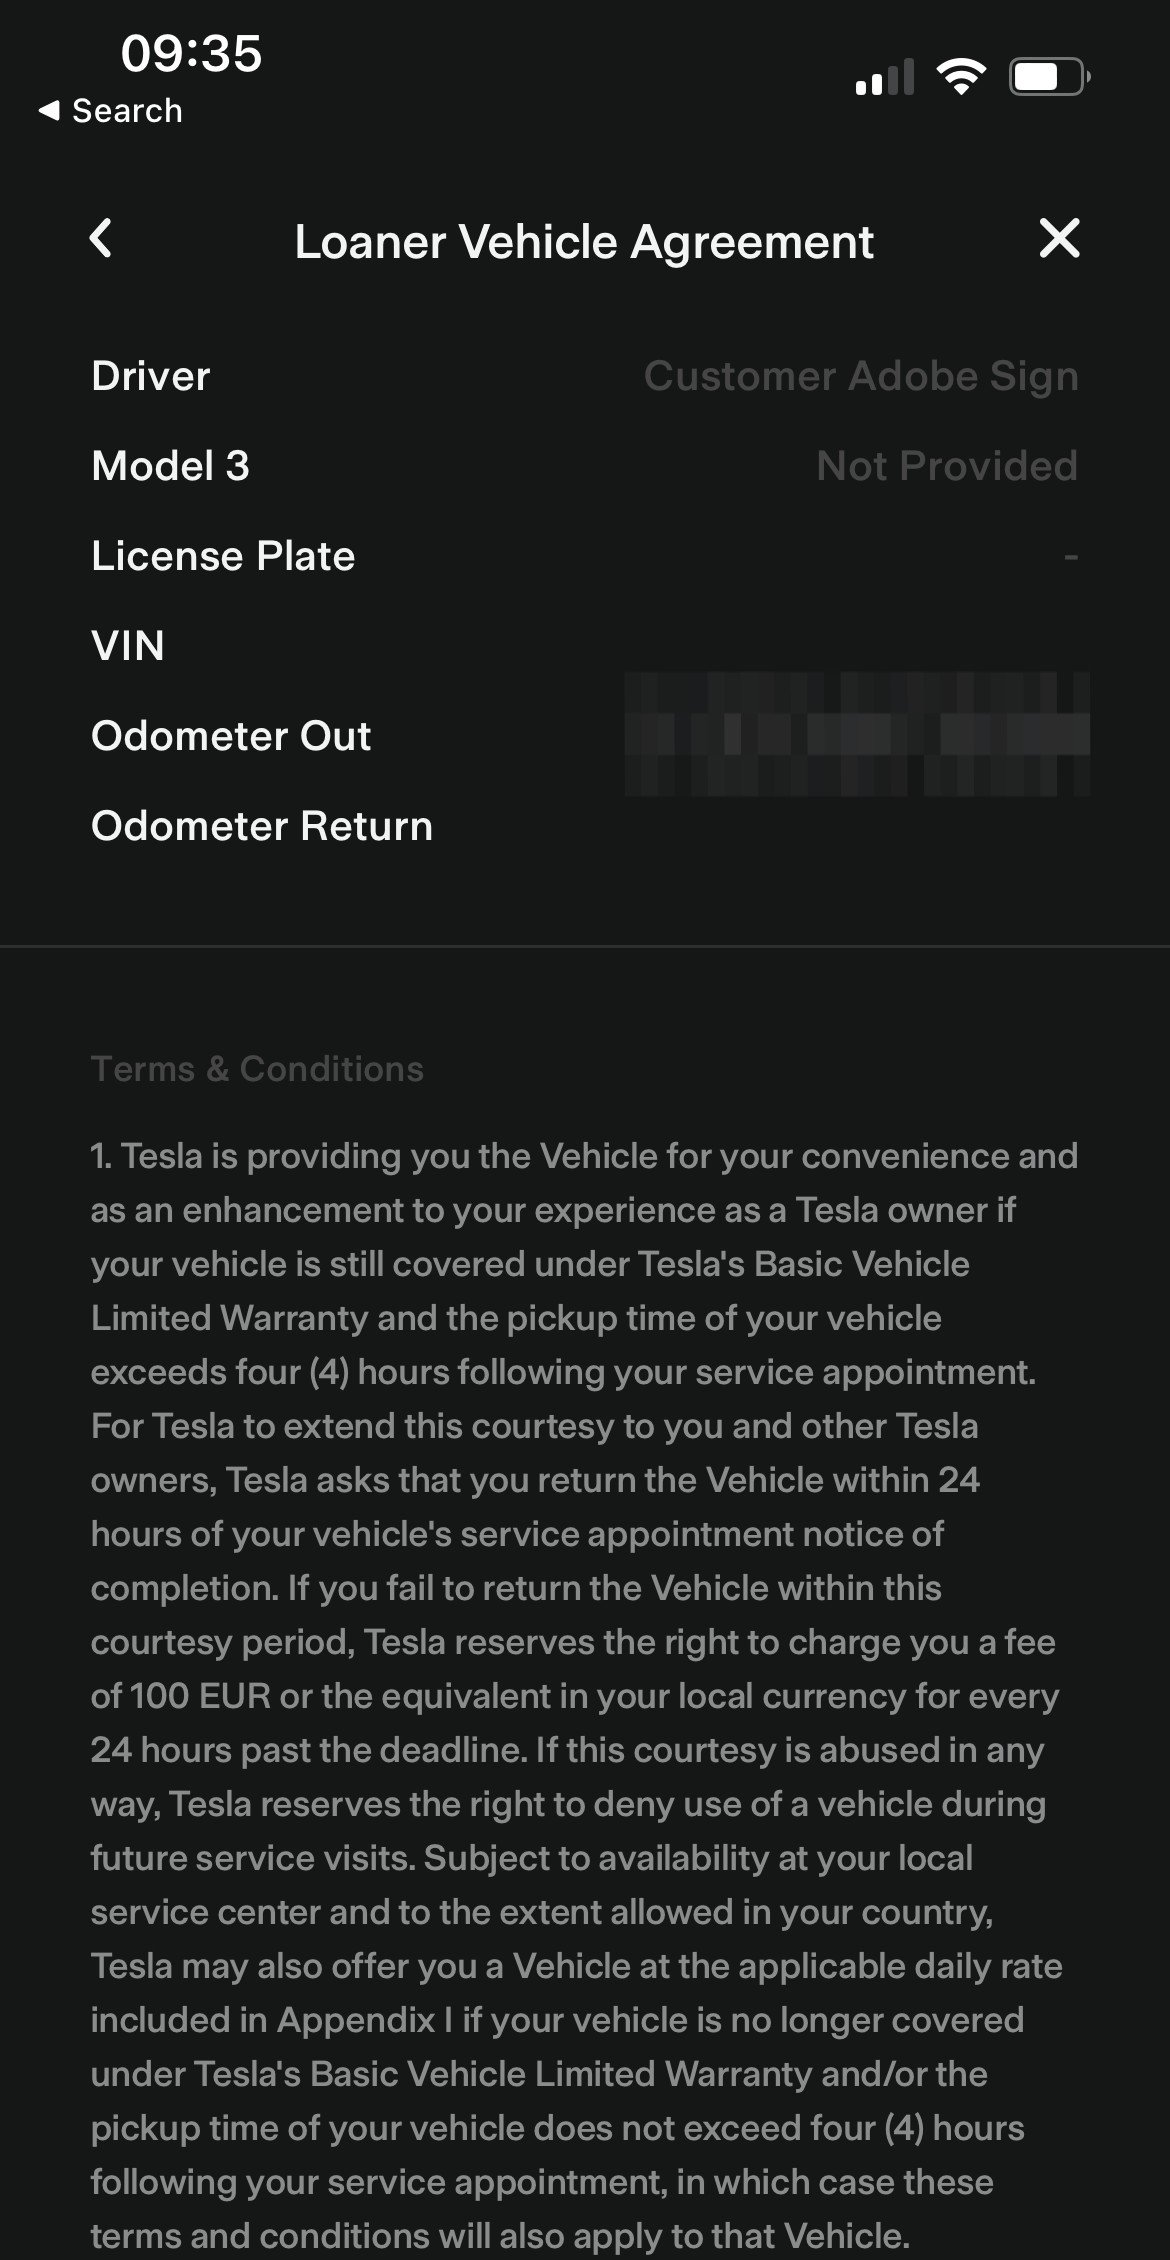 Loaners are offered as a courtesy (free) for customers who are getting work done under Tesla's Basic Limited Time Warranty.